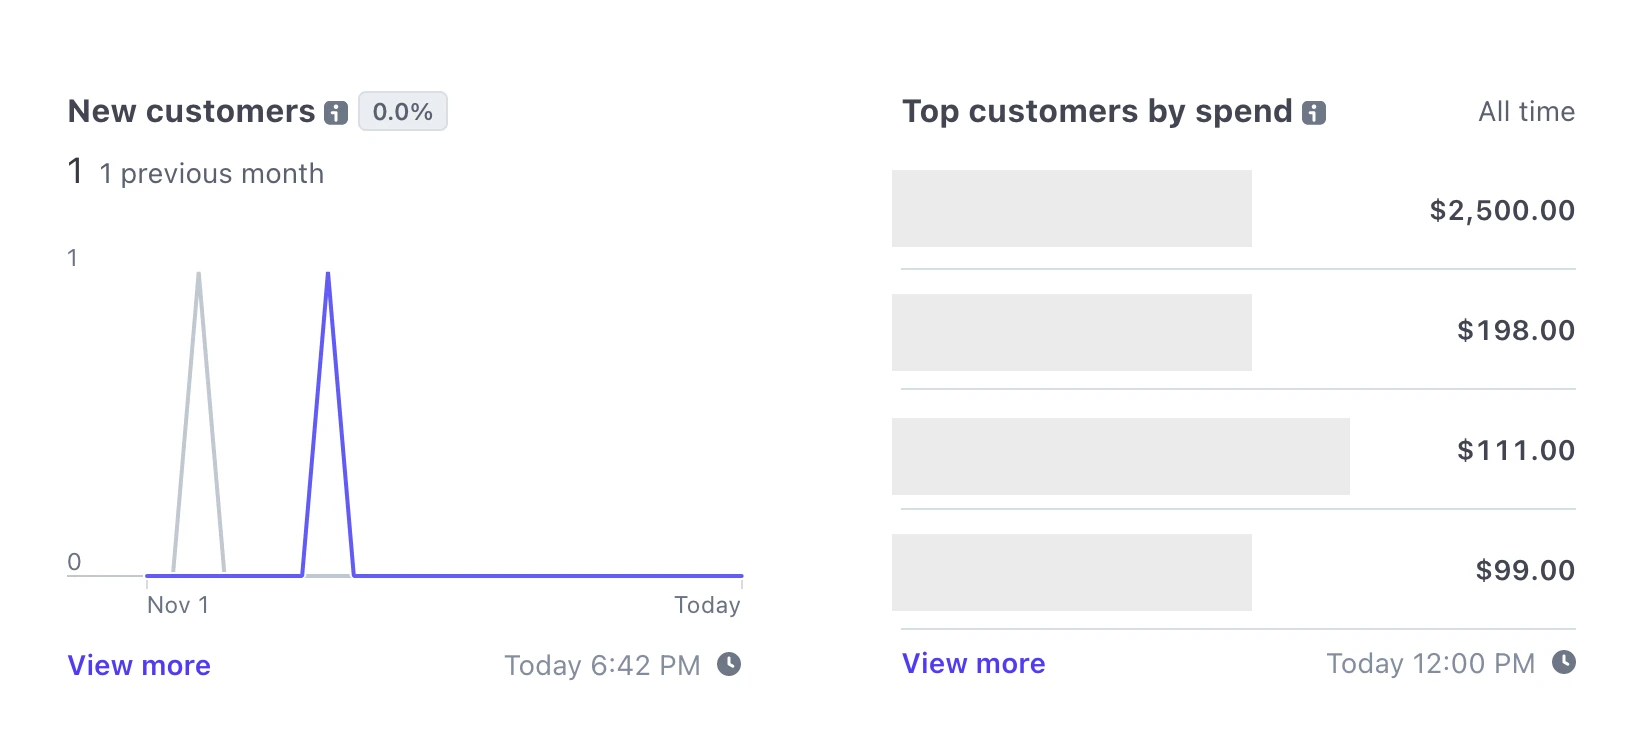 Stripe dashboard screenshot showing that we acquired 1 new customer in November, along with a breakdown of top customers by spend.